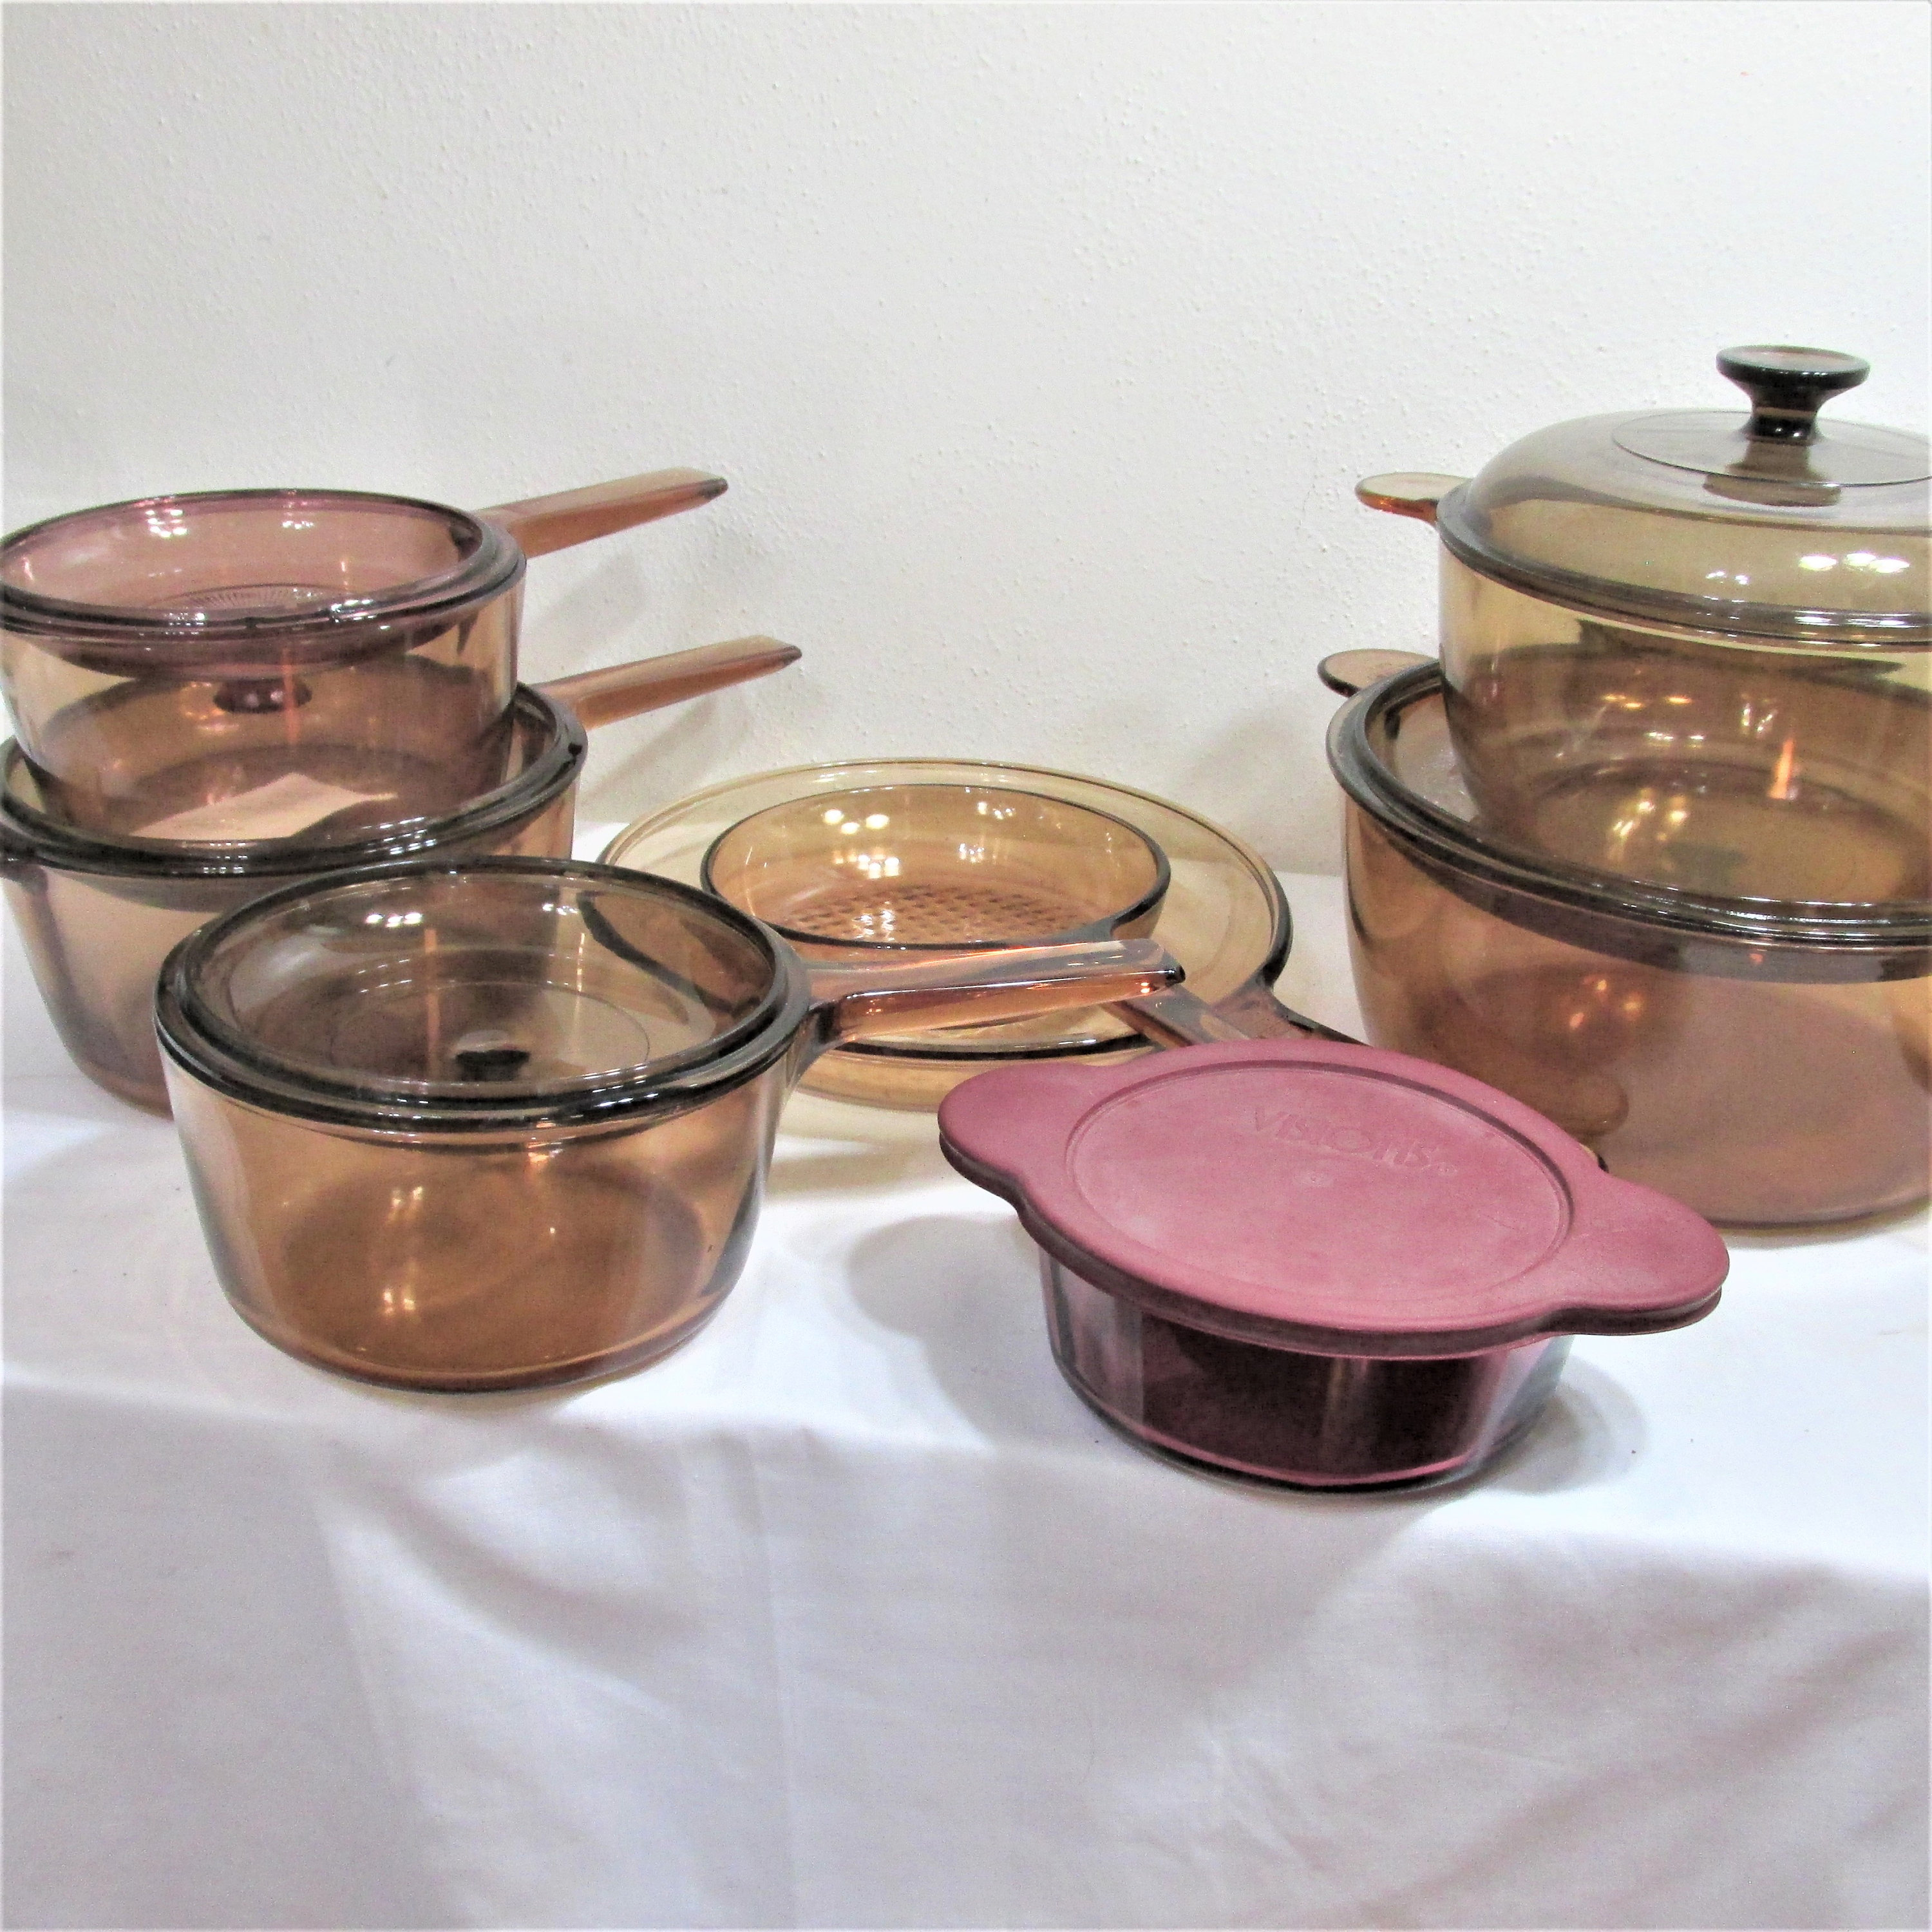 A set of vintage Visions cookware is my daily driver. : r/cookware